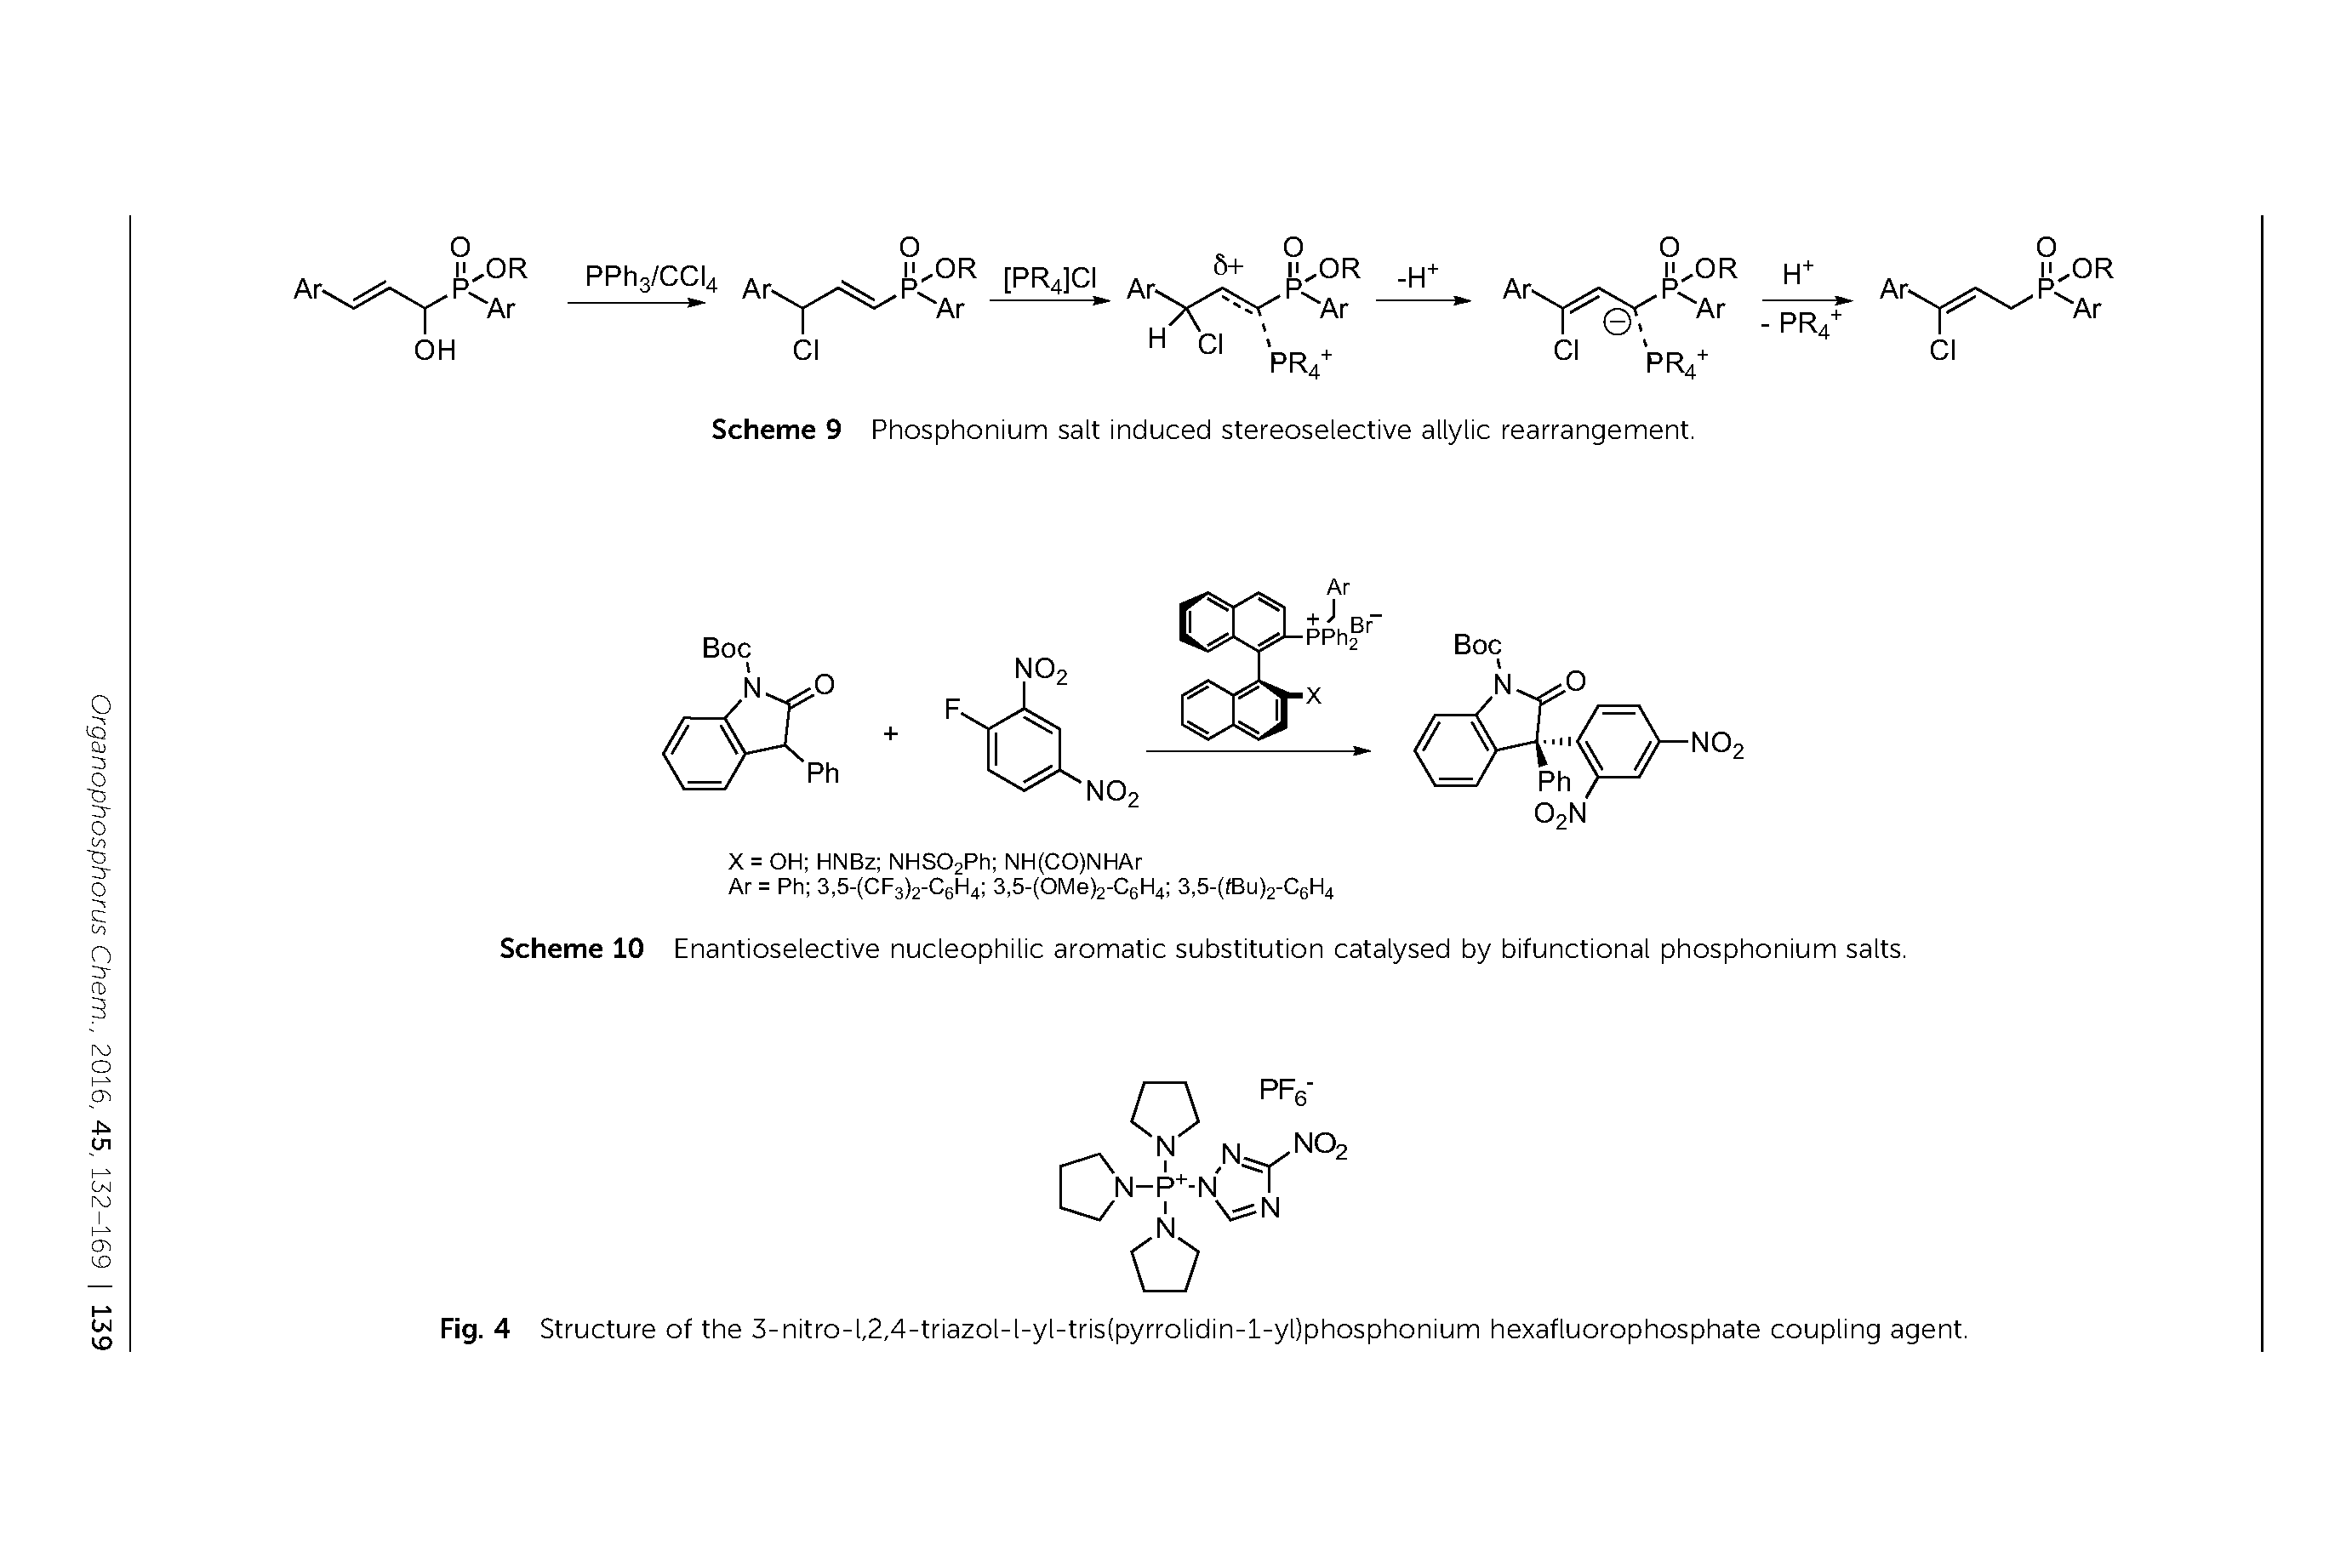 Scheme 10 Enantioselective nucleophilic aromatic substitution catalysed by bifunctional phosphonium salts.